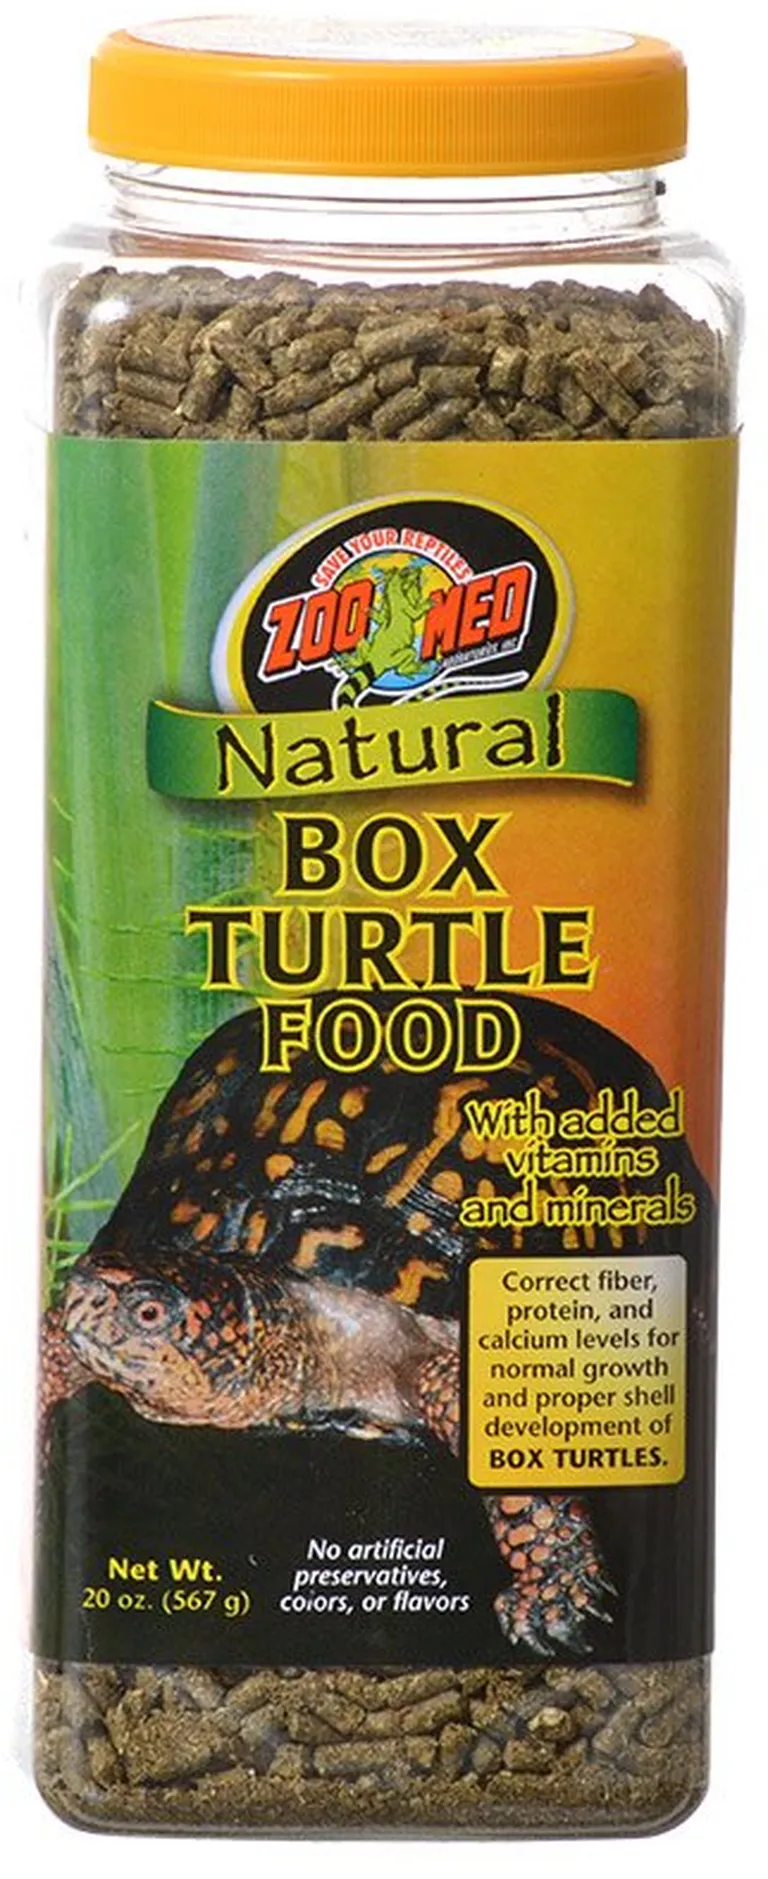 Zoo Med Natural Box Turtle Food Photo 1